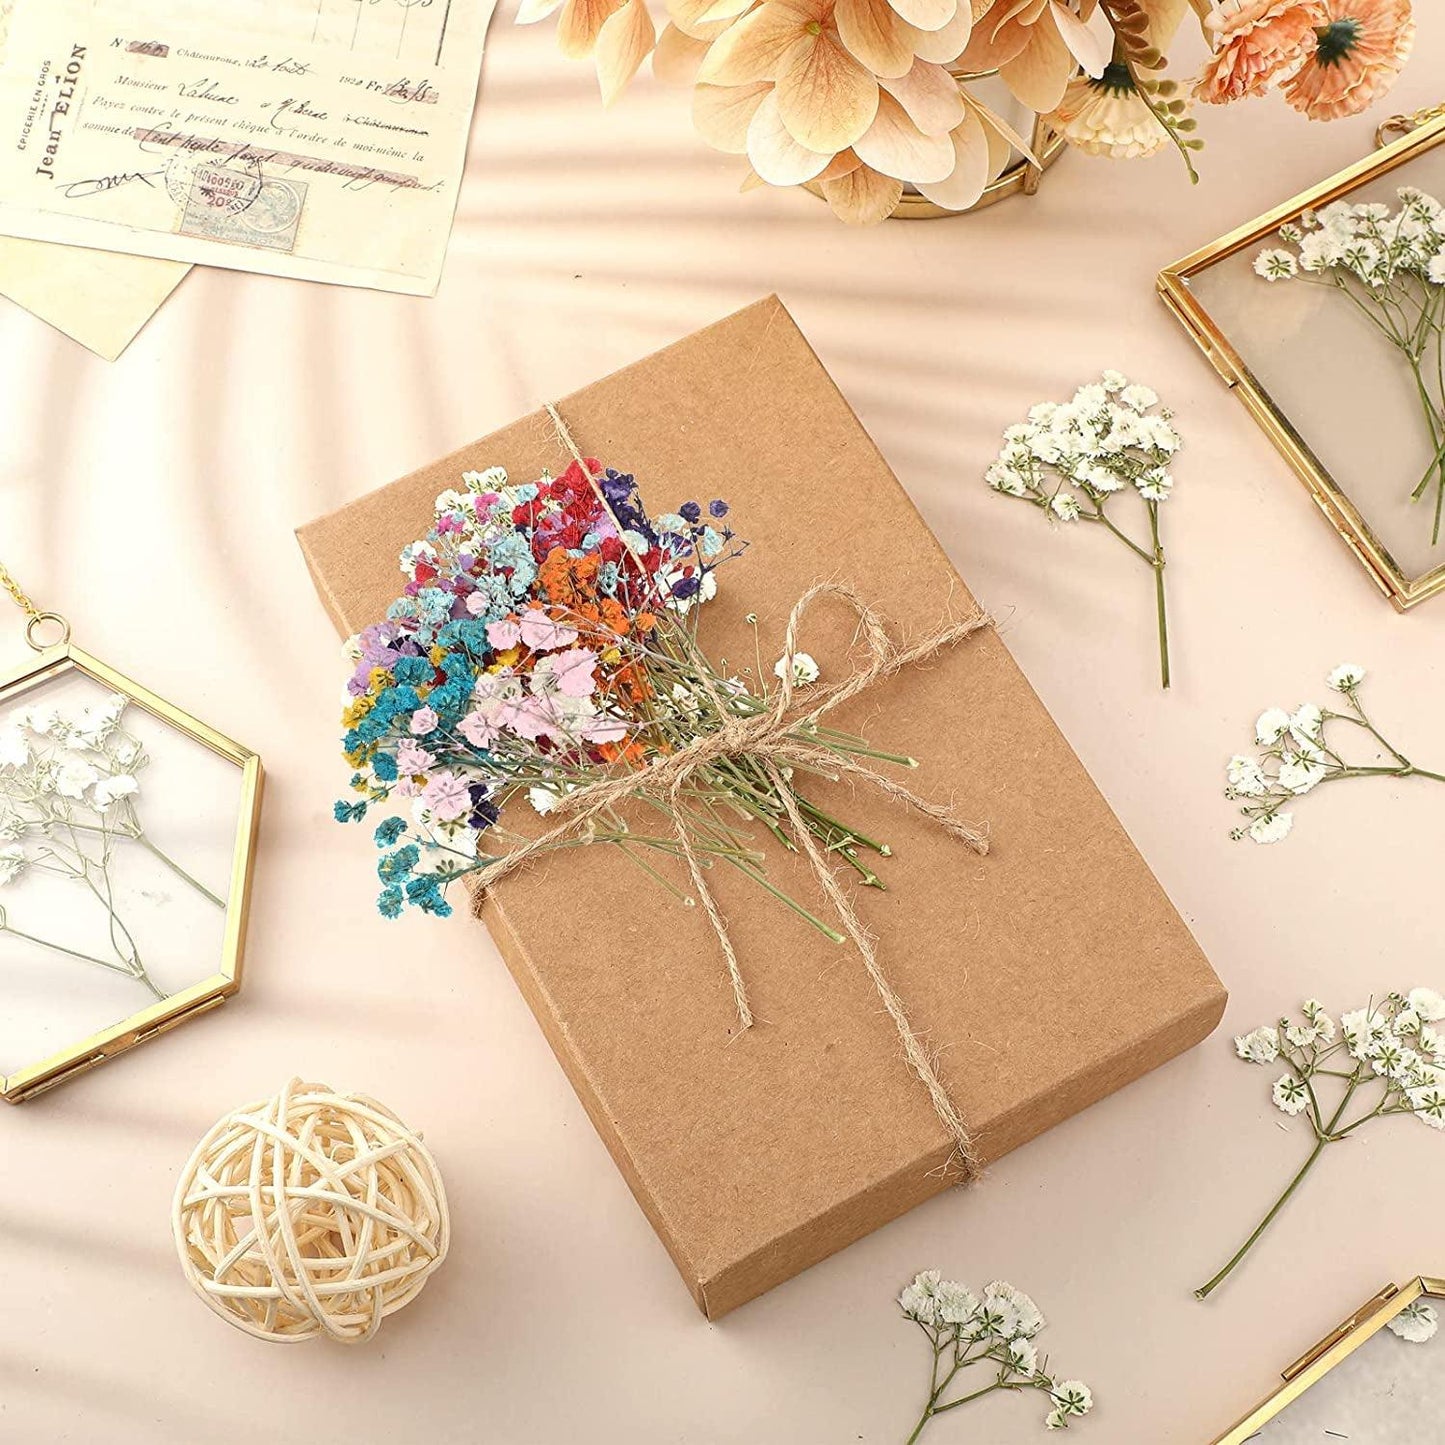 200 Pcs Resin Dried Flowers for Resin Dried Baby'S Breath Flowers Real Natural Pressed Flowers Gypsophila Bouquet Gypsophila Branches for Card Making Resin Art DIY Flowers Bulk, 10 Colors - WoodArtSupply